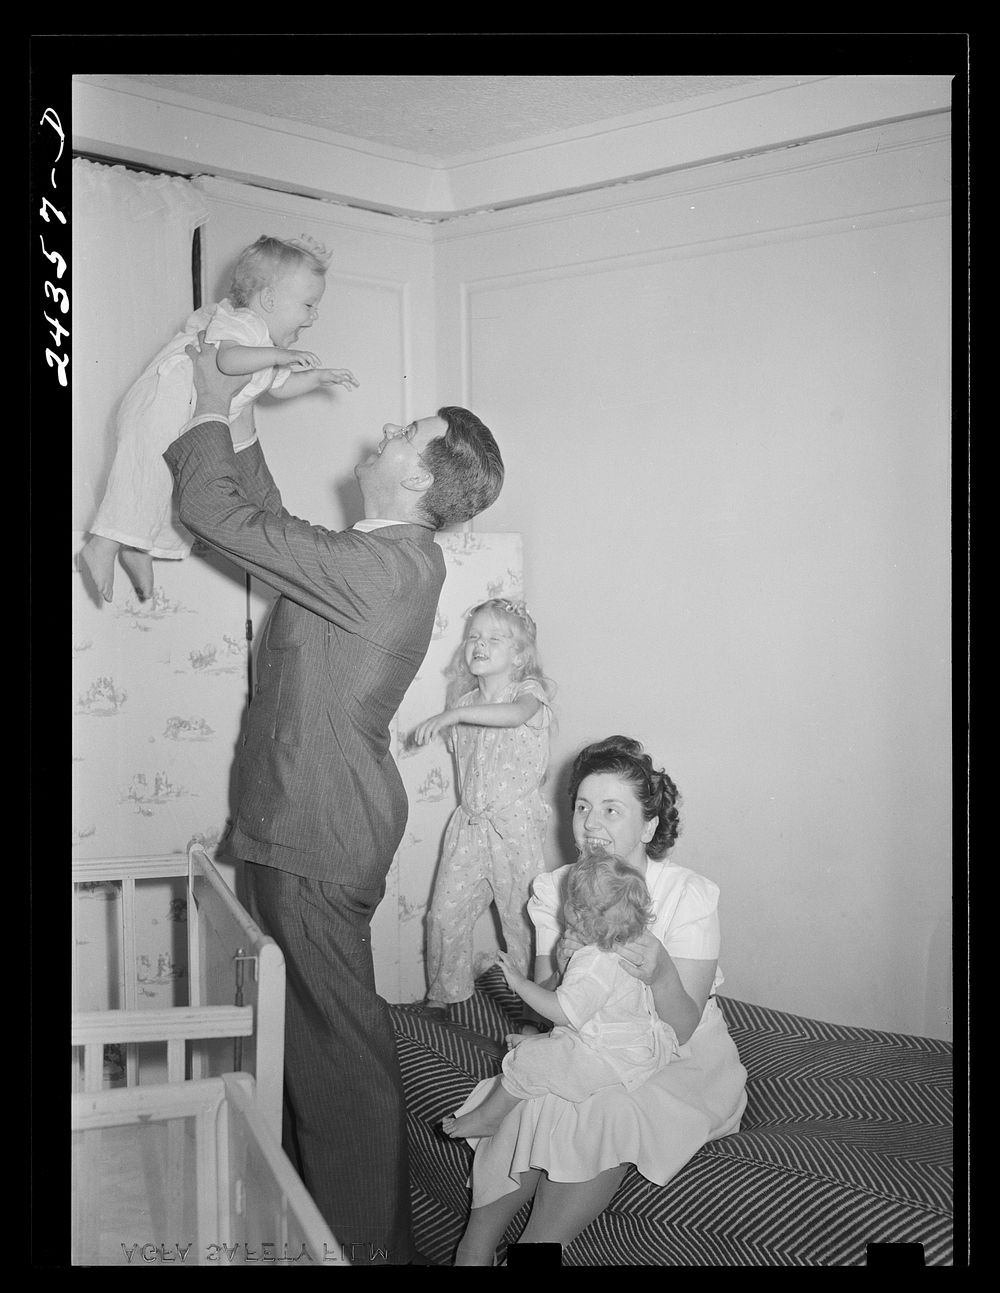 Family living at Forest Hills. New York City. Sourced from the Library of Congress.